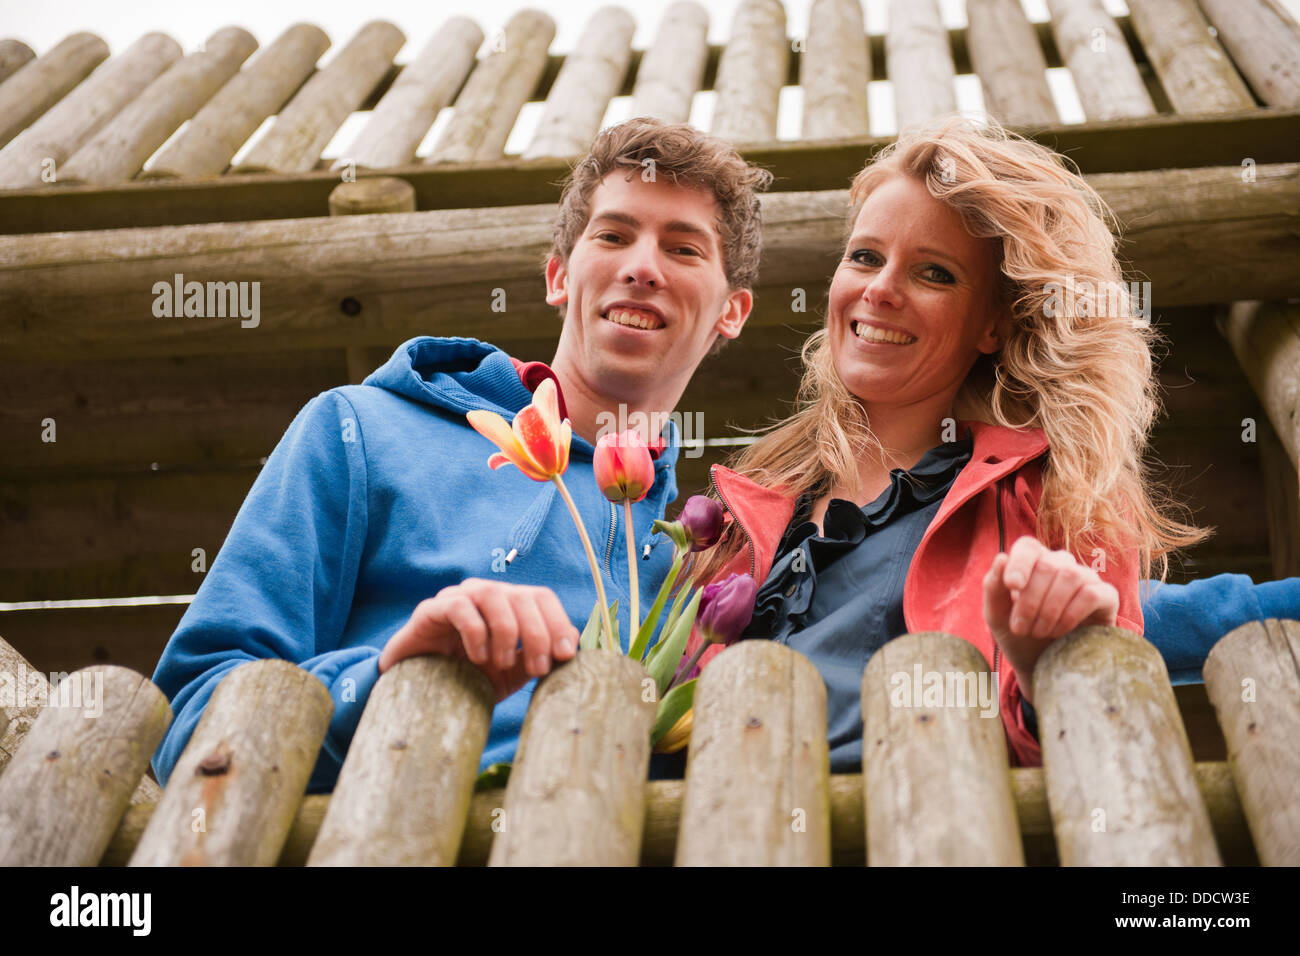 Couple in Dutch observation hut Stock Photo